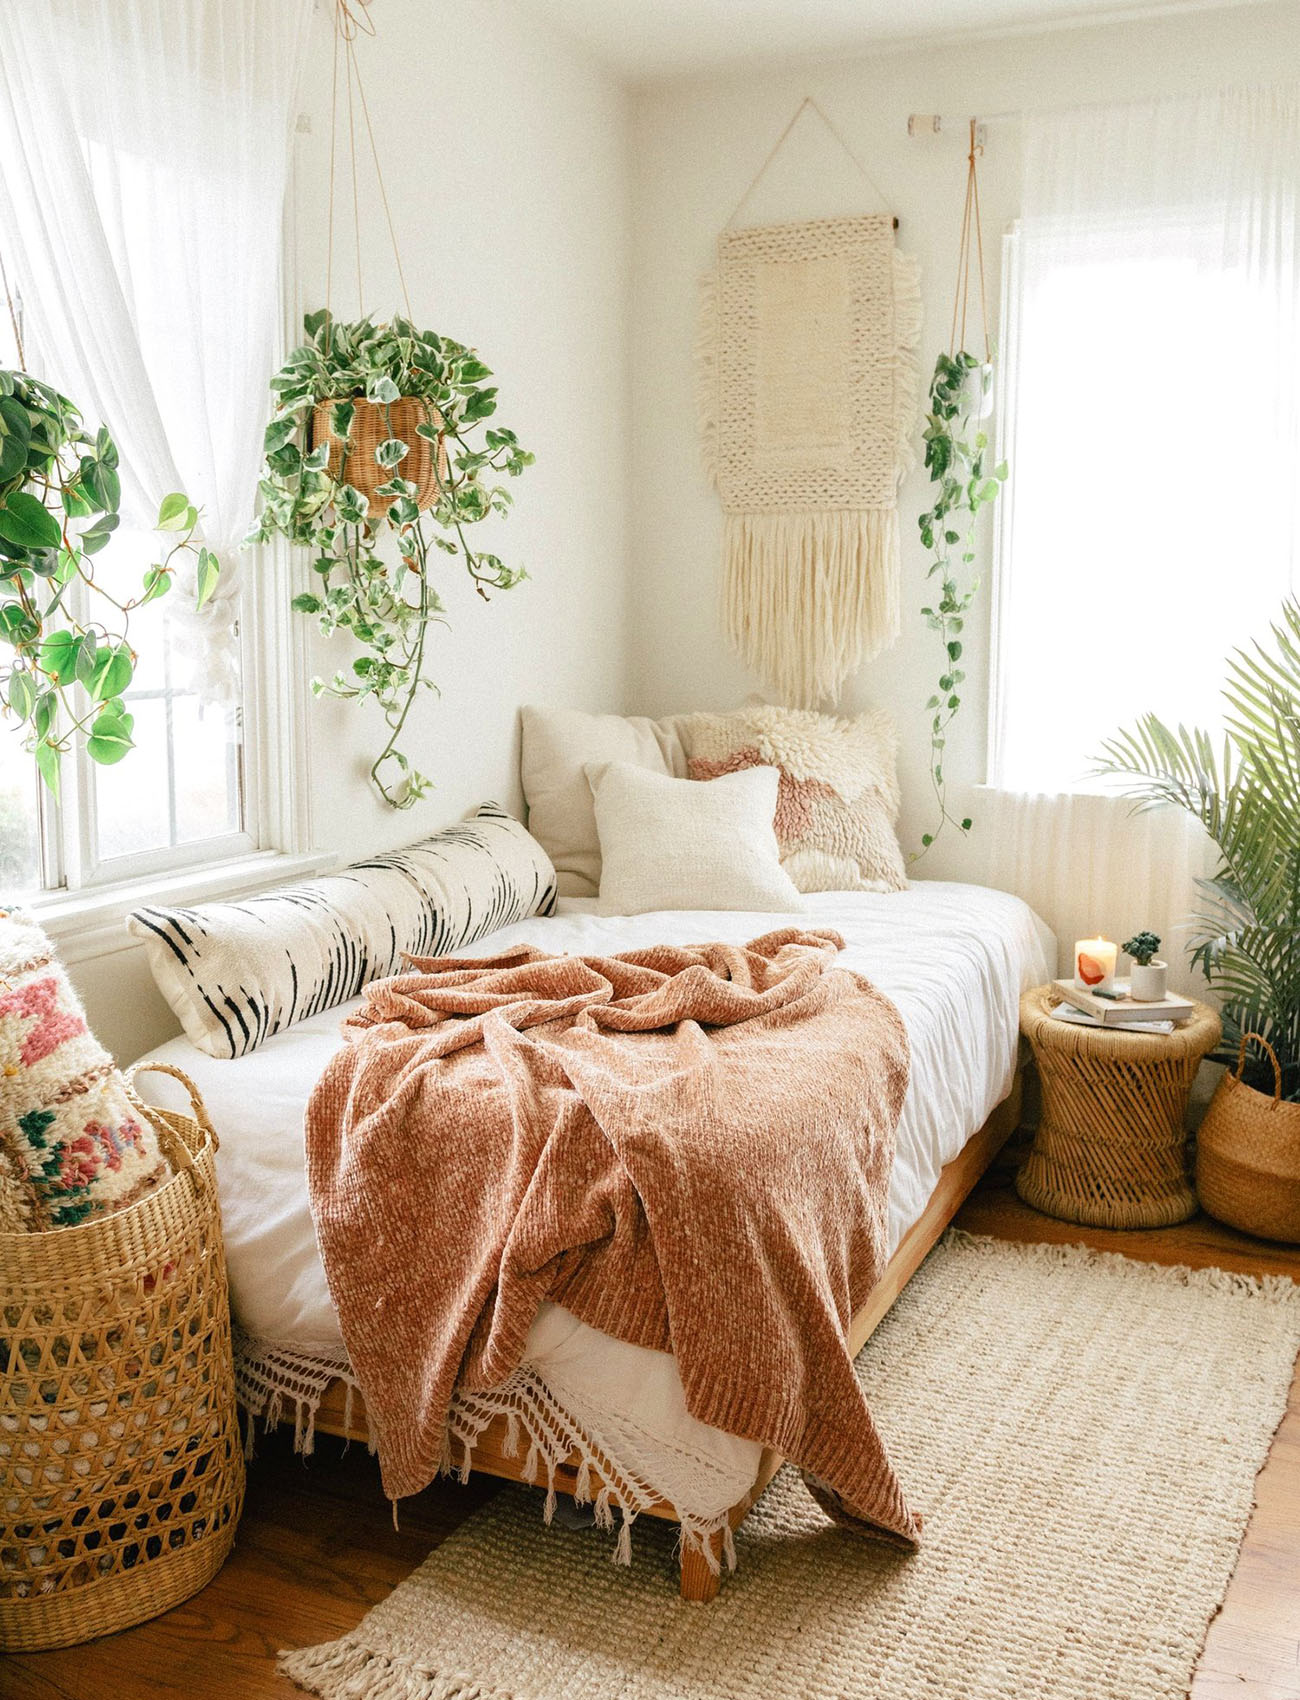 Bohemian Bedroom Ideas On A Budget | Americanwarmoms.org